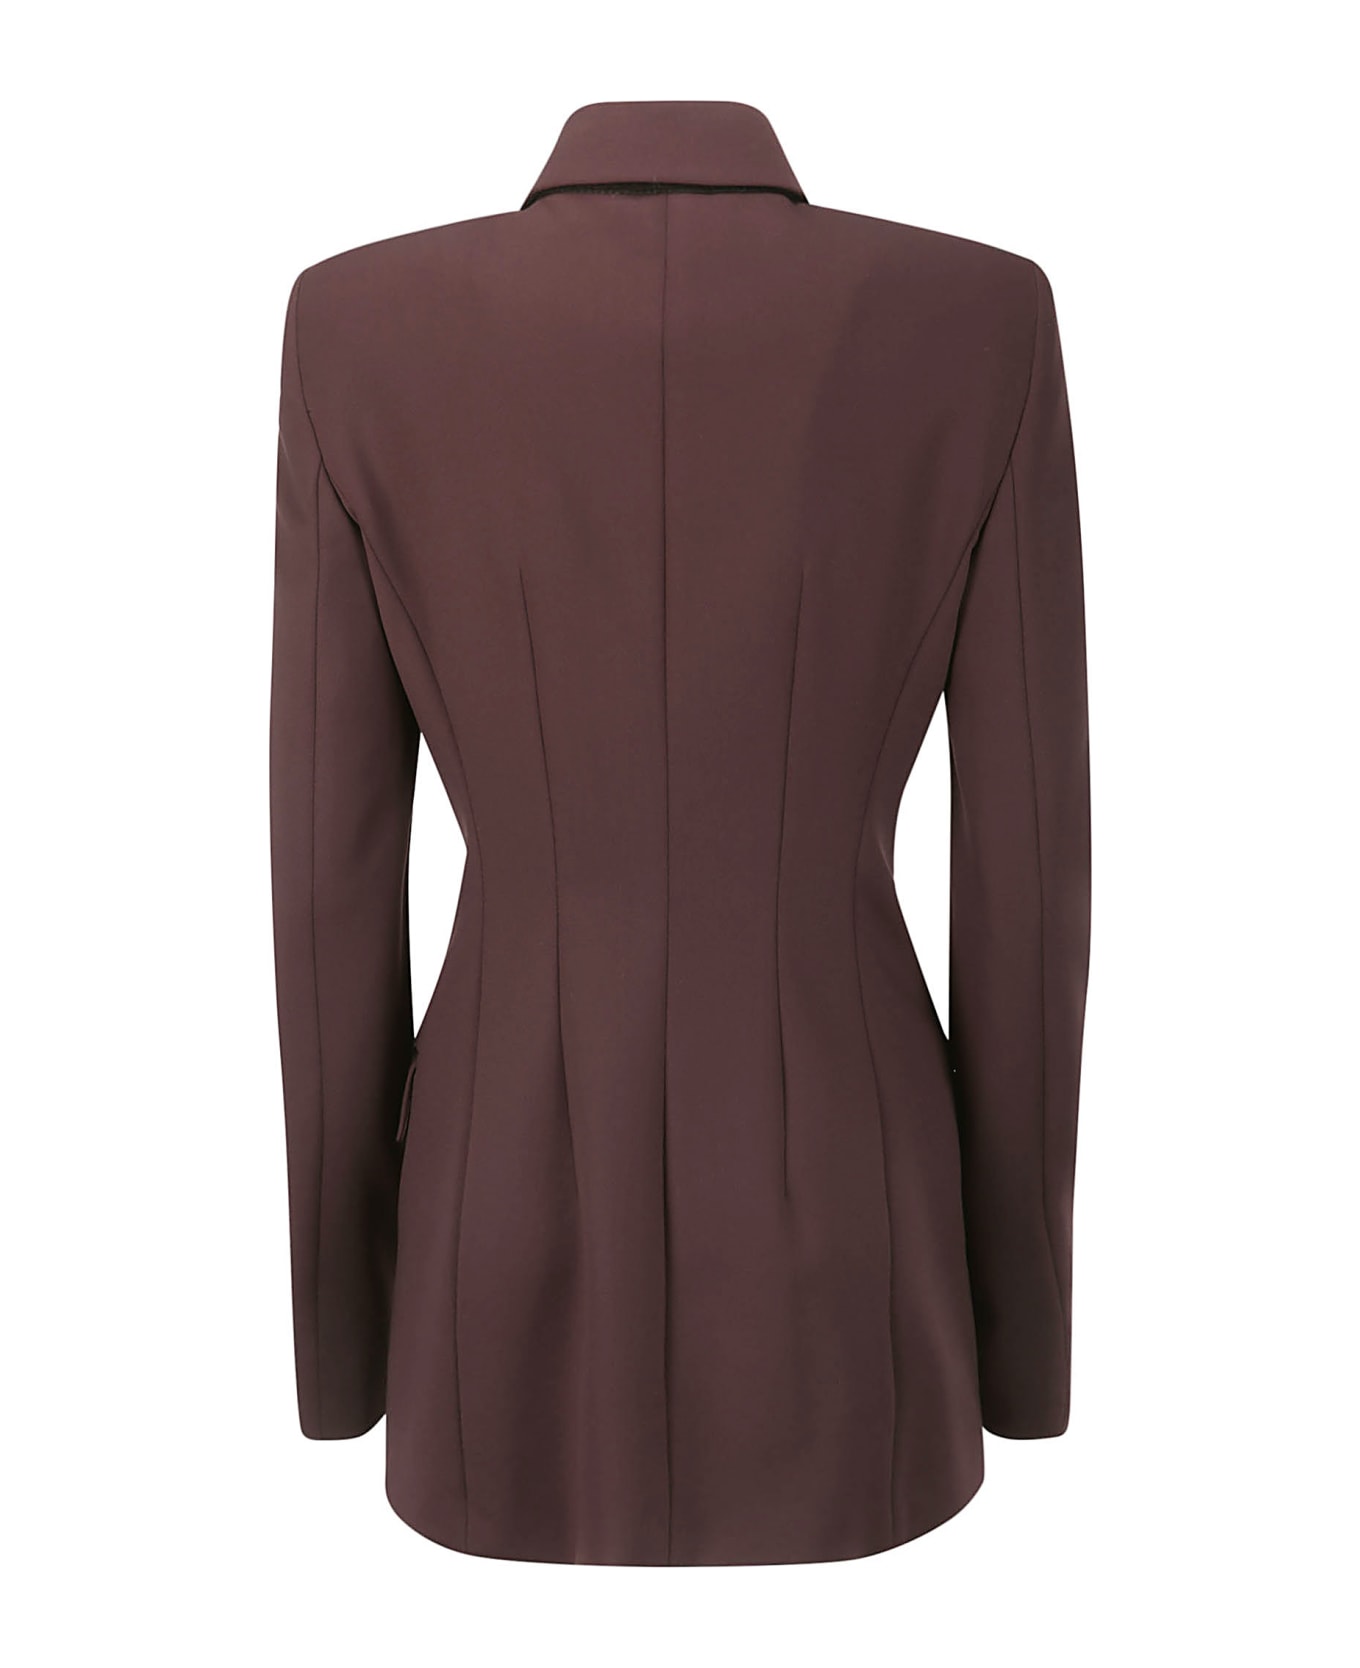 SportMax Frizzo - BROWN コート